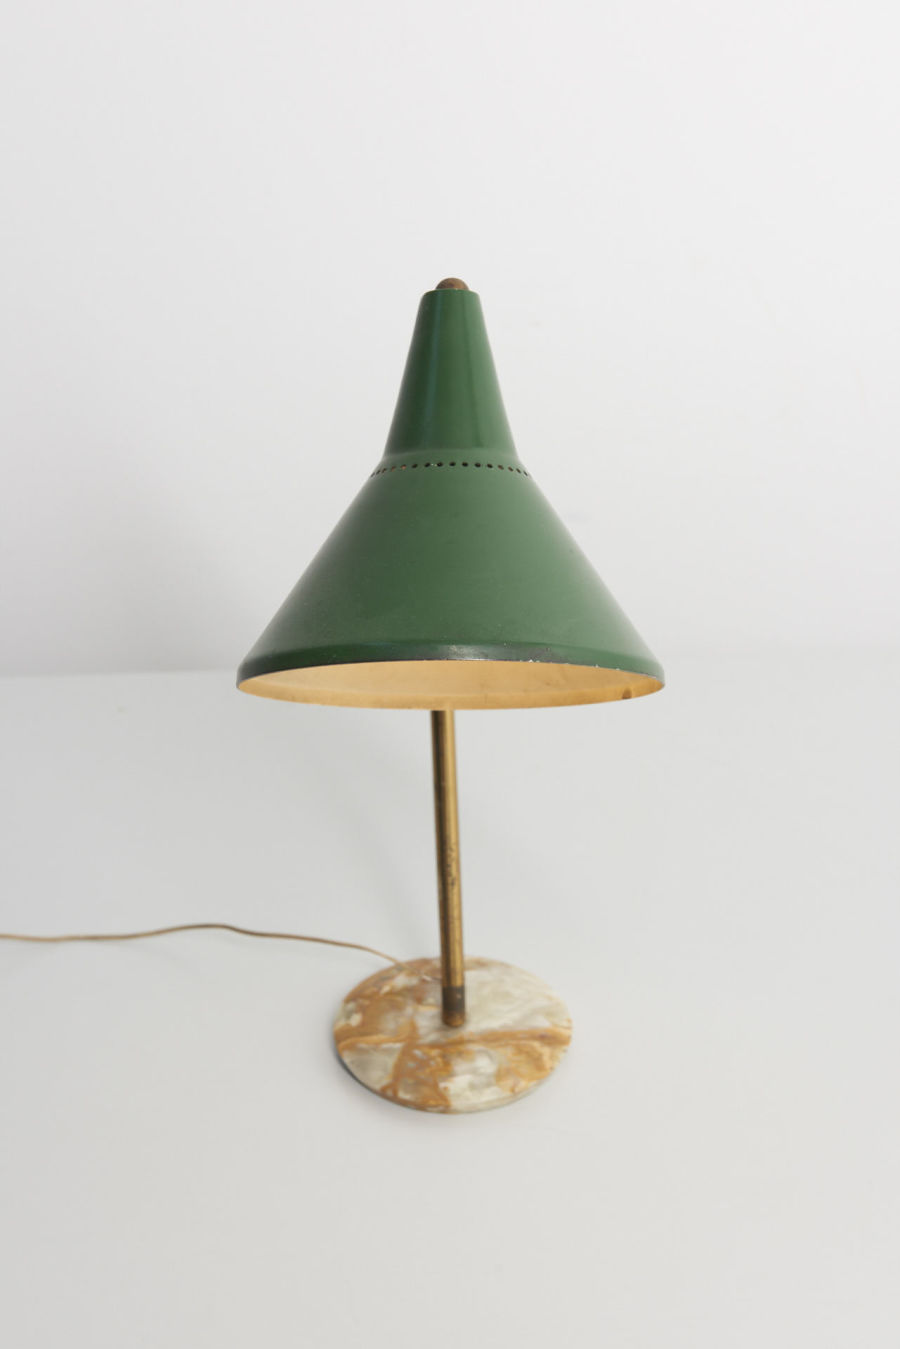 modestfurniture-vintage-2445-table-lamp-italy-marble-green-shade03